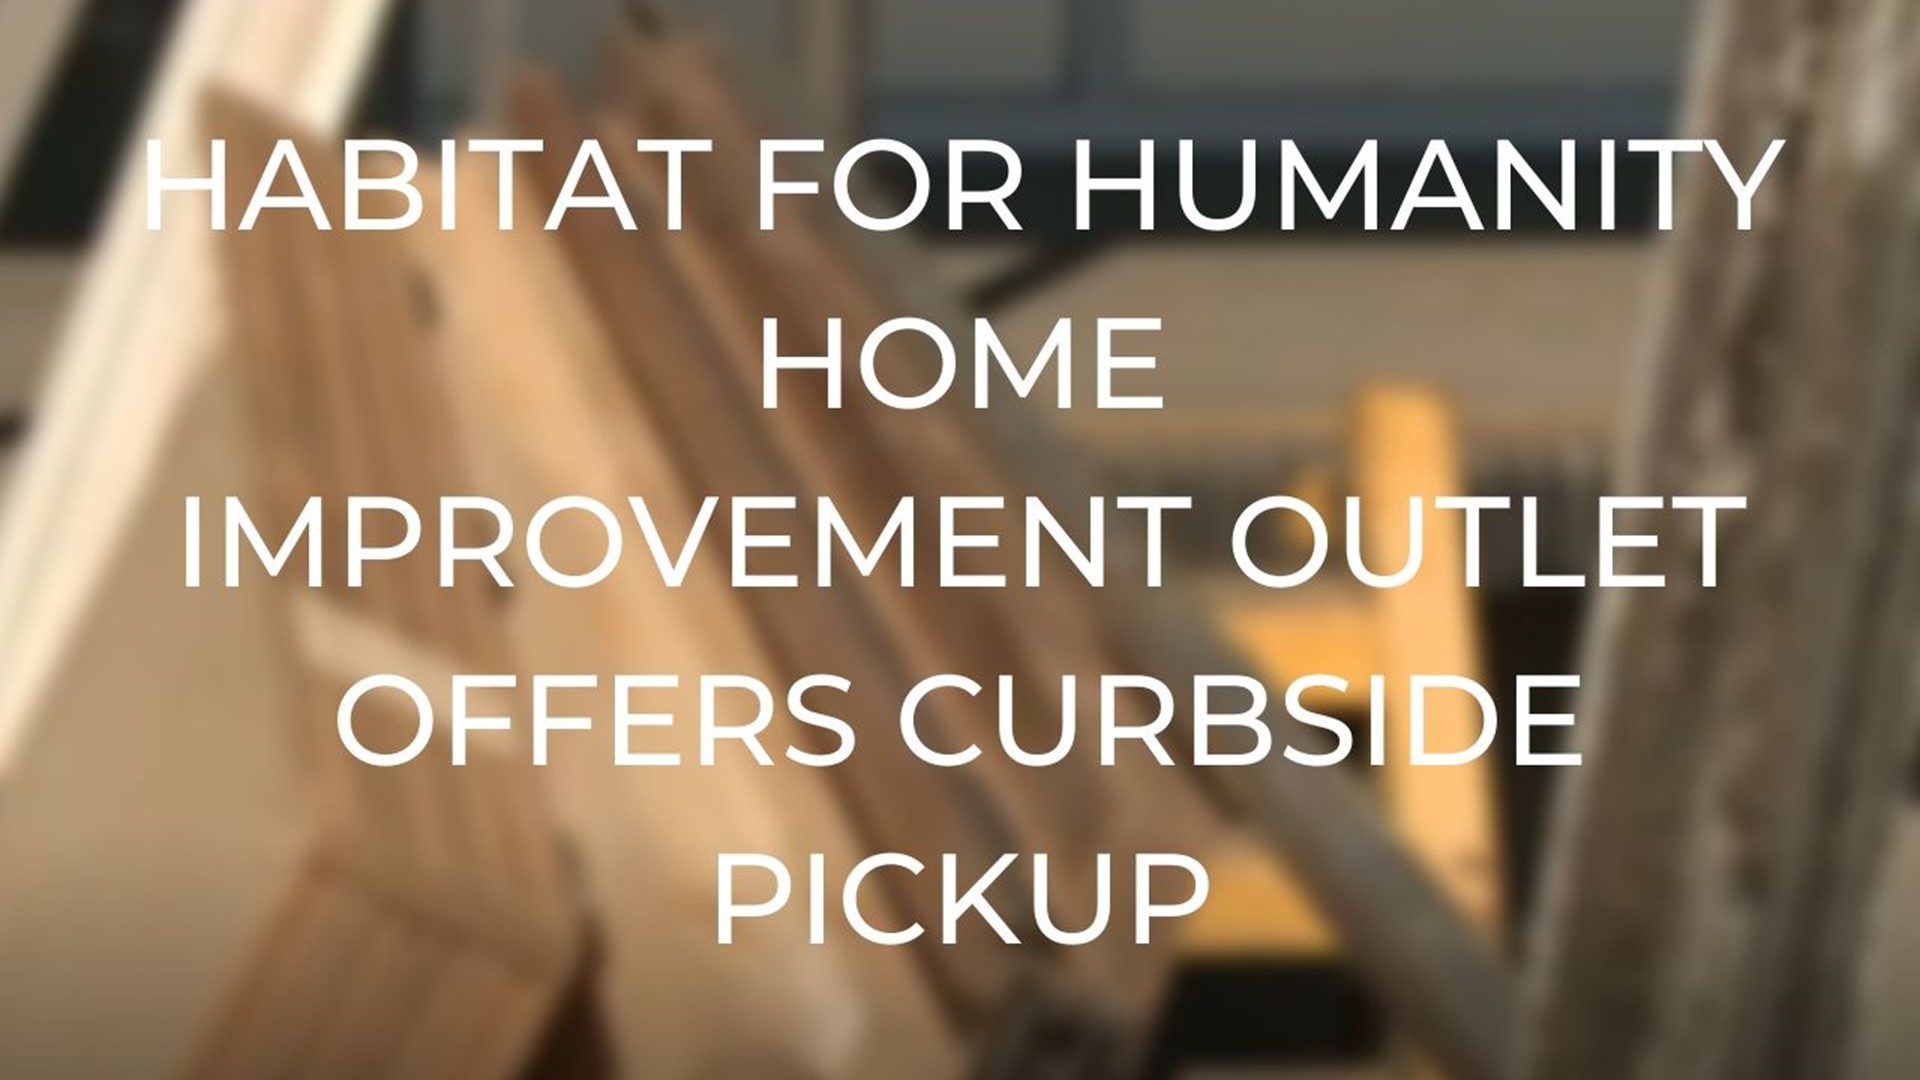 Habitat for Humanity ReStore launched a new website that allows customers to shop online and pick up their order in Northeast Portland.